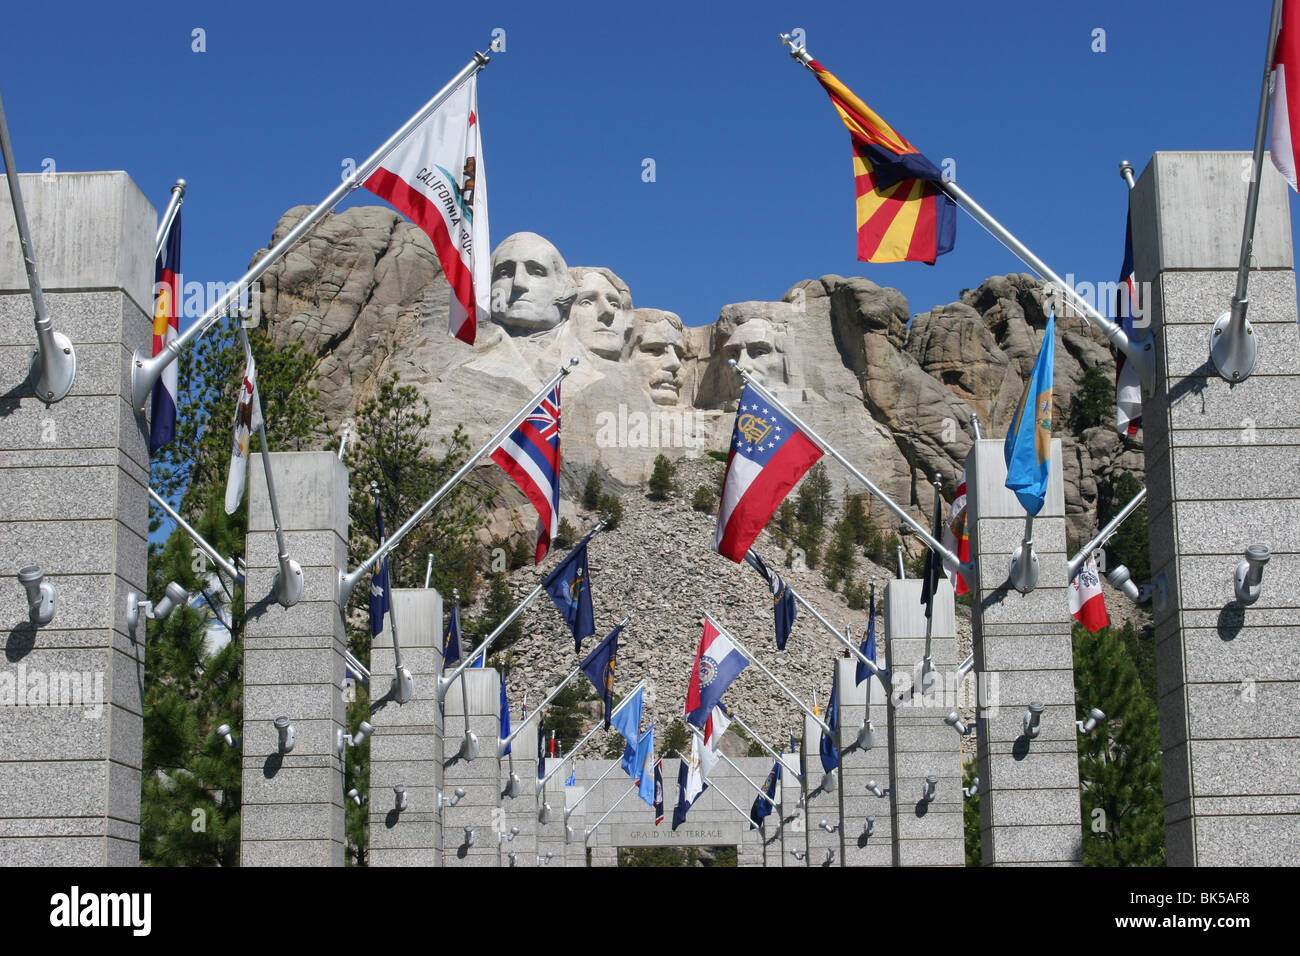 Flags on columns with sculptures former US presidents in background Mt Rushmore National Monument Black Hills South Dakota USA Stock Photo